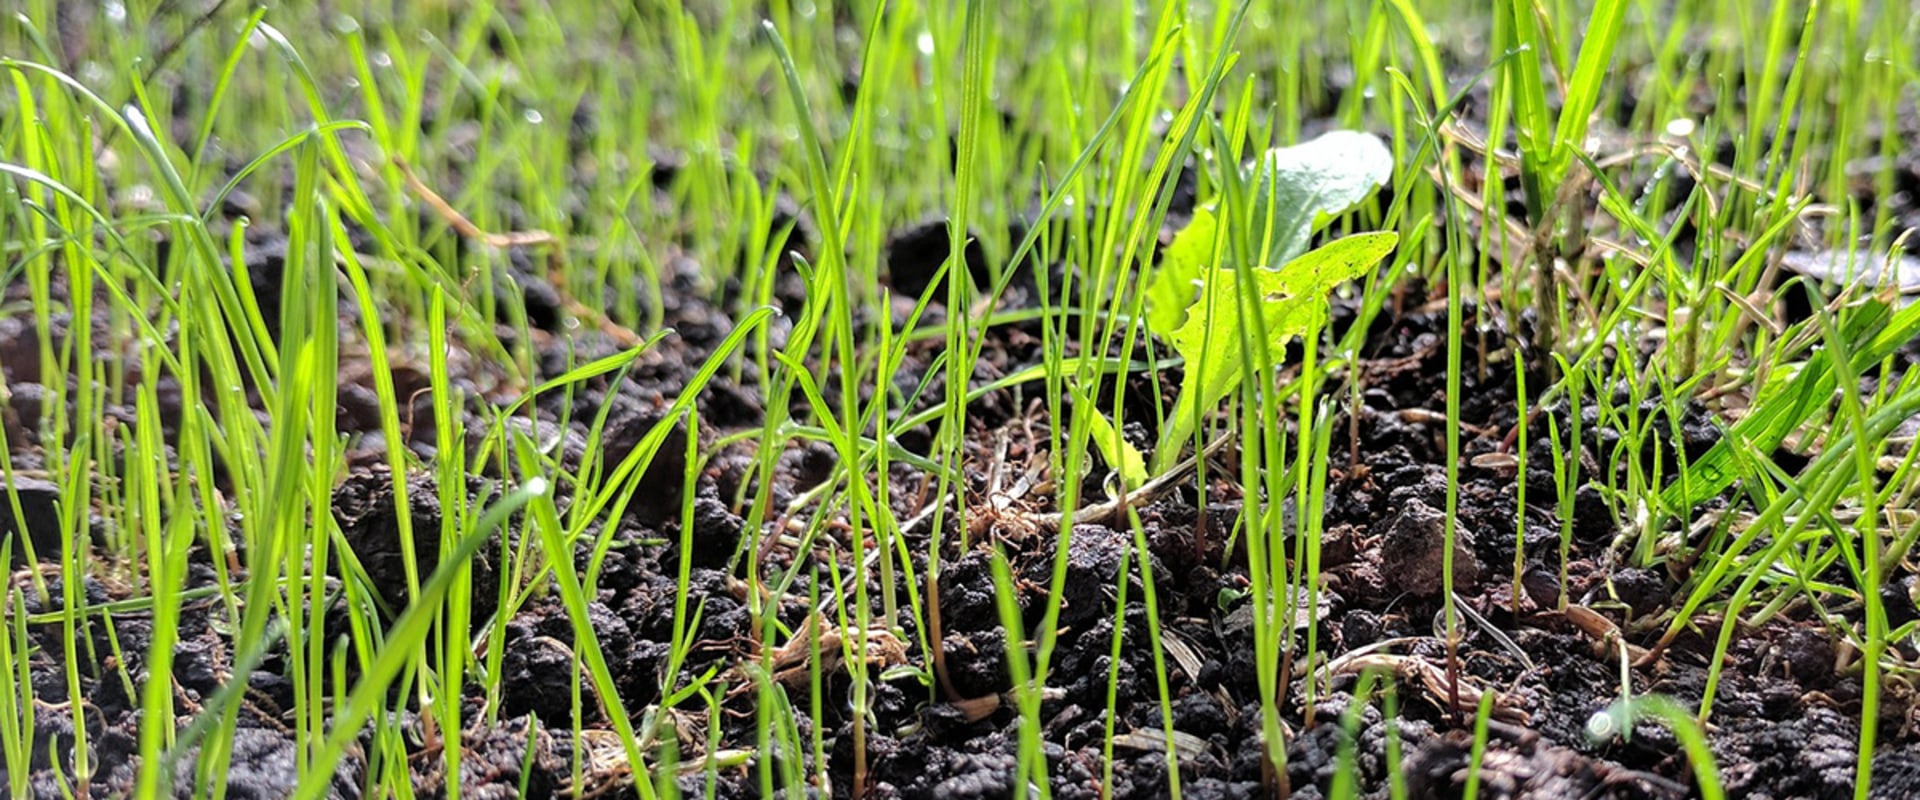 When should i plant grass seed in spring?